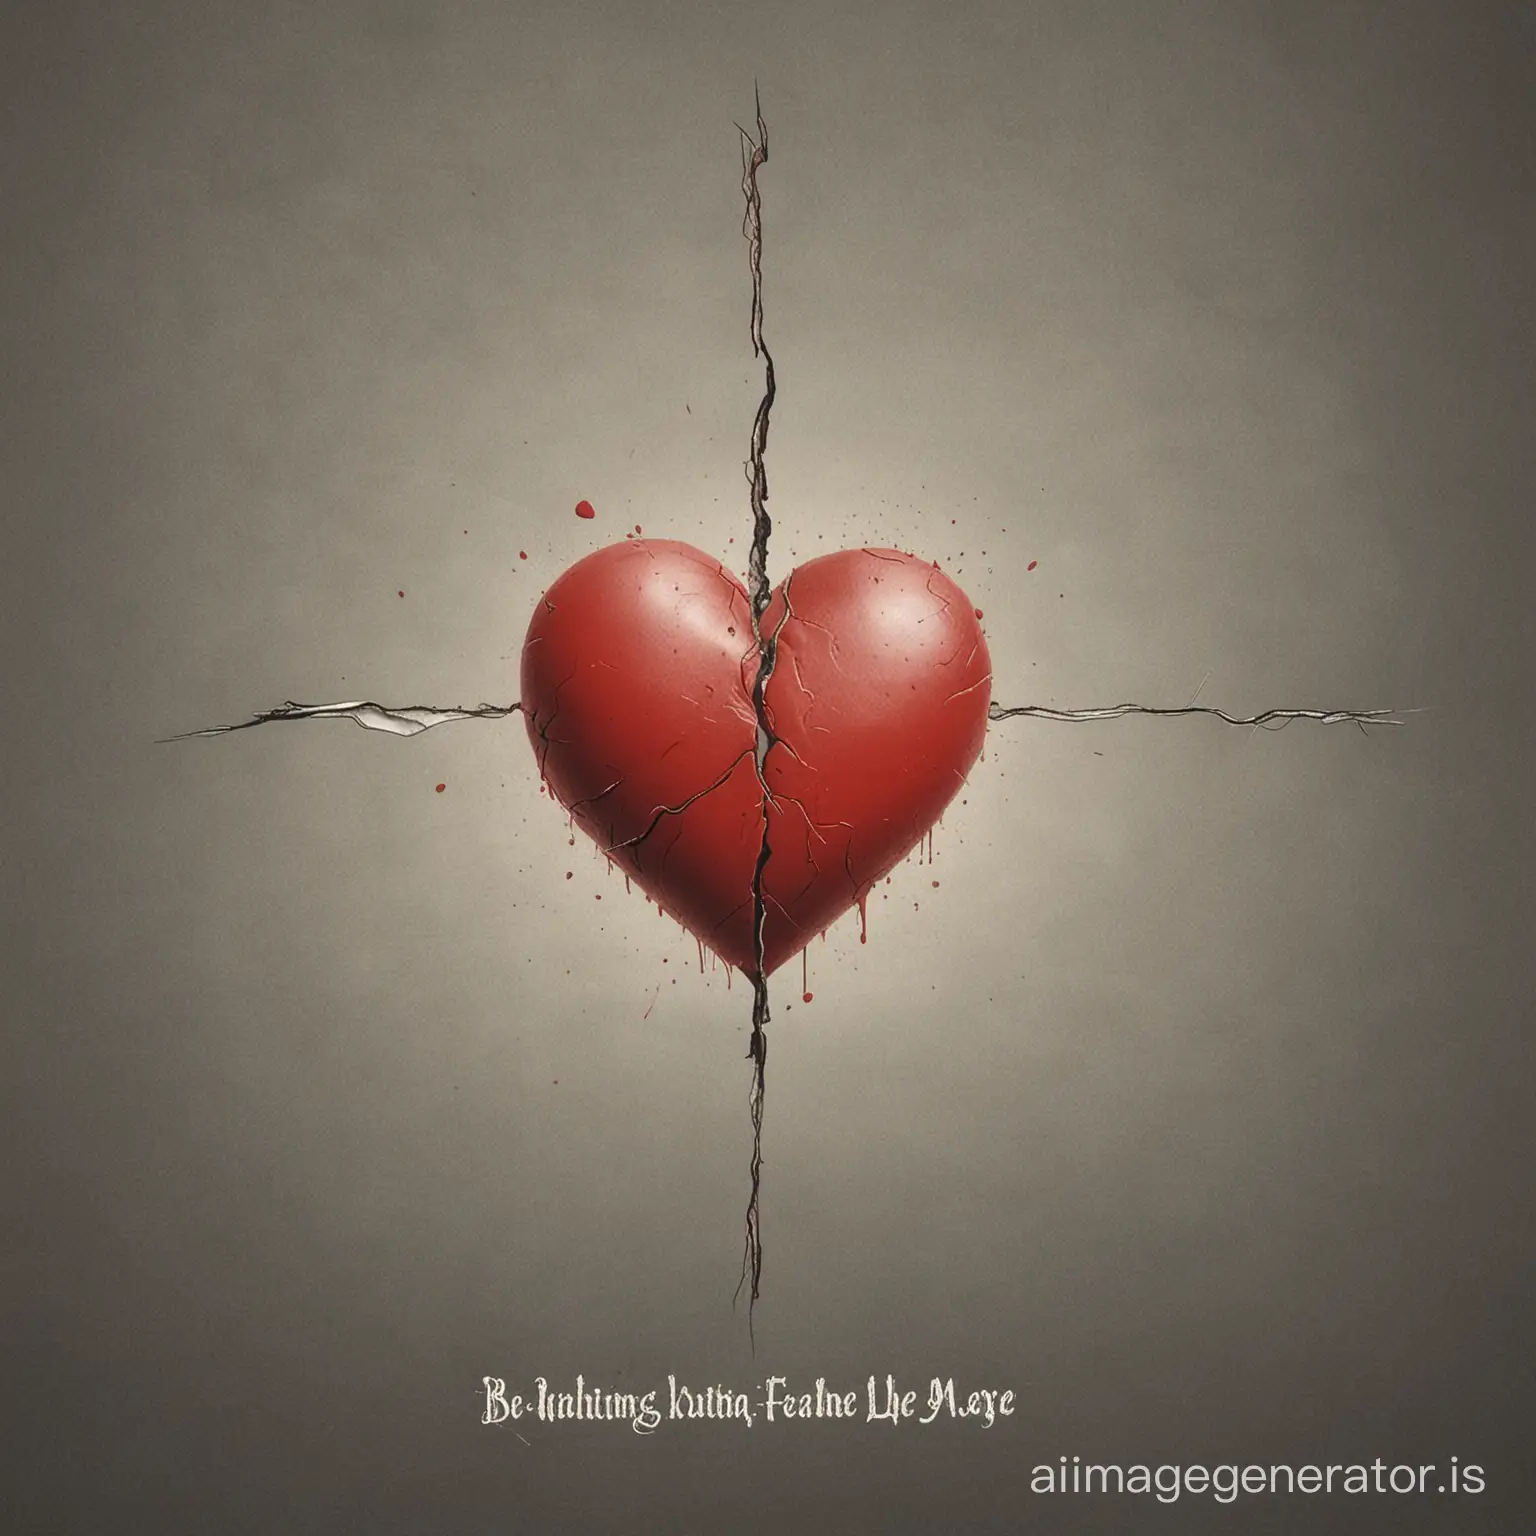 Album cover with an small breaking heart in the middle